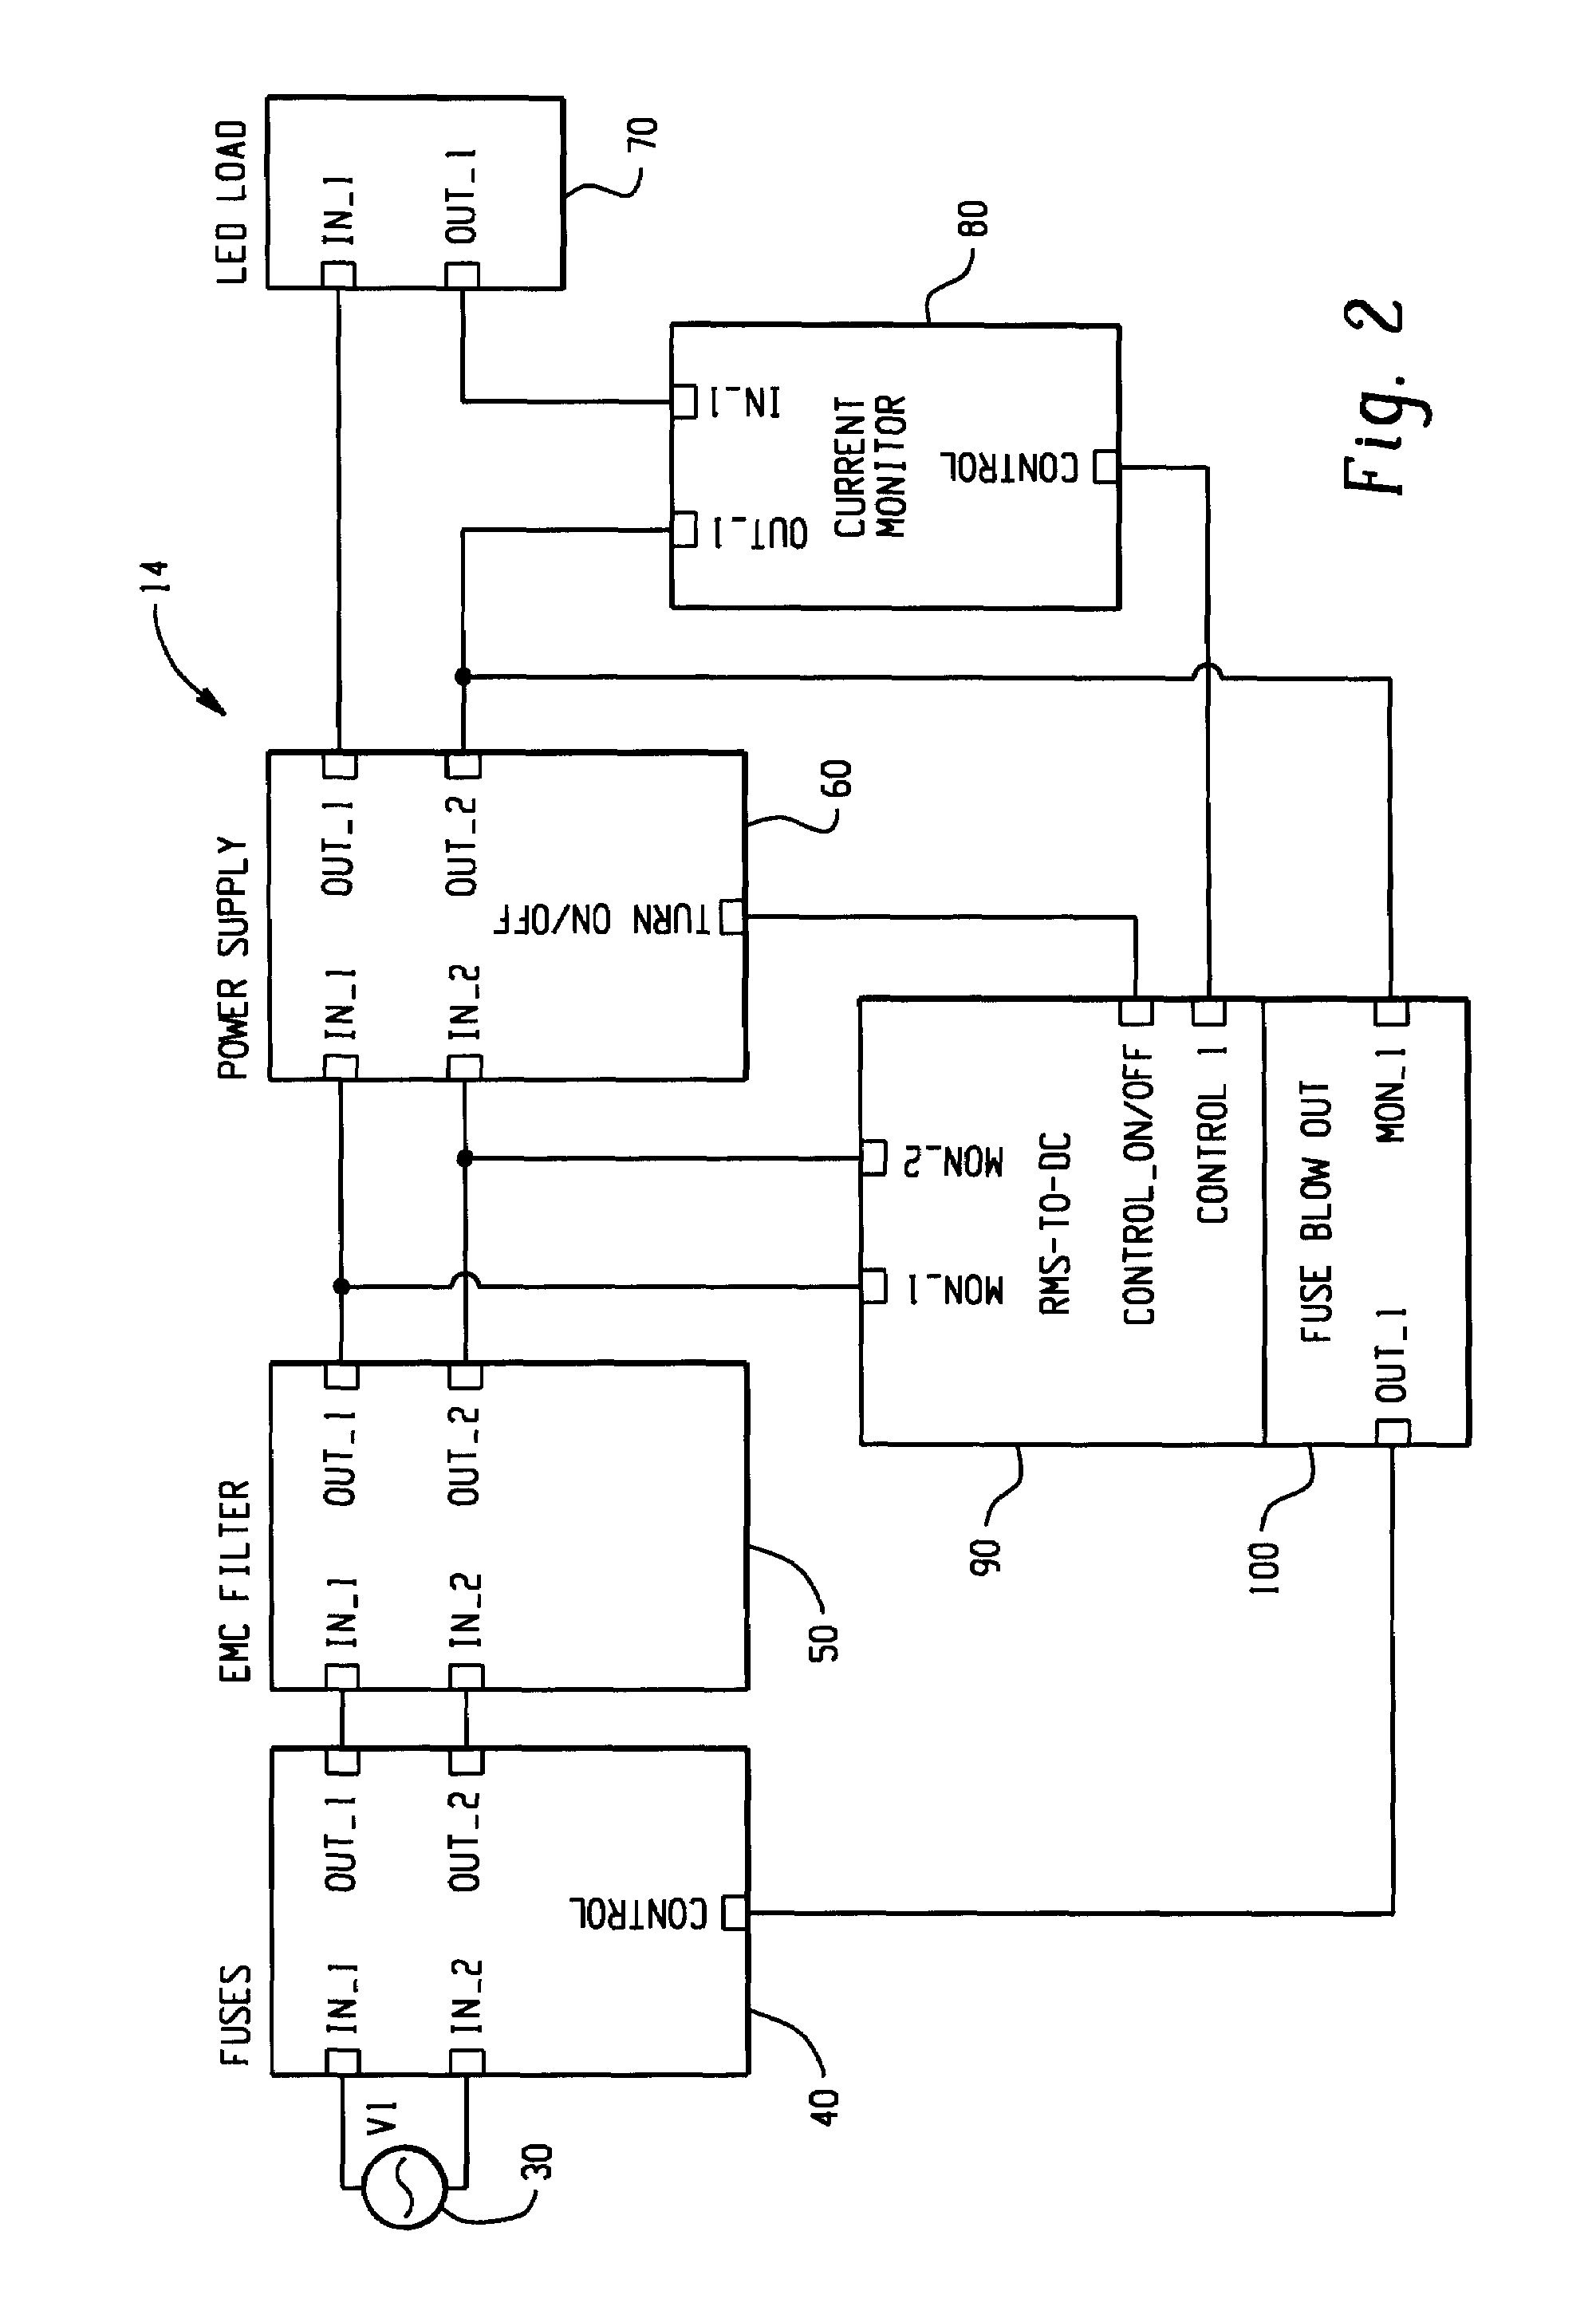 Power supply for LED signal